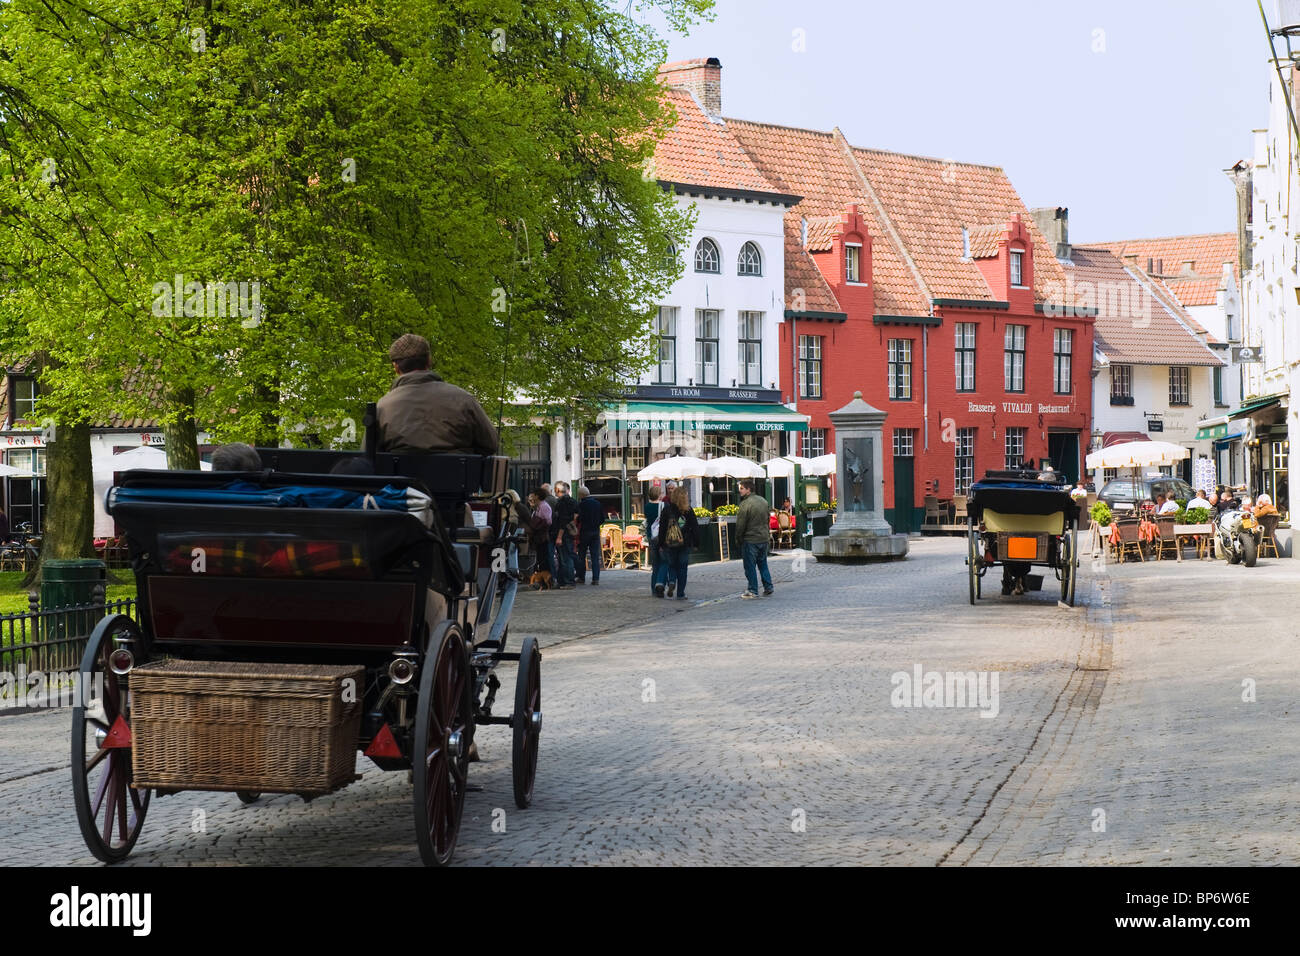 Page 4 - Travel Destination High Resolution Stock Photography and Images - Alamy